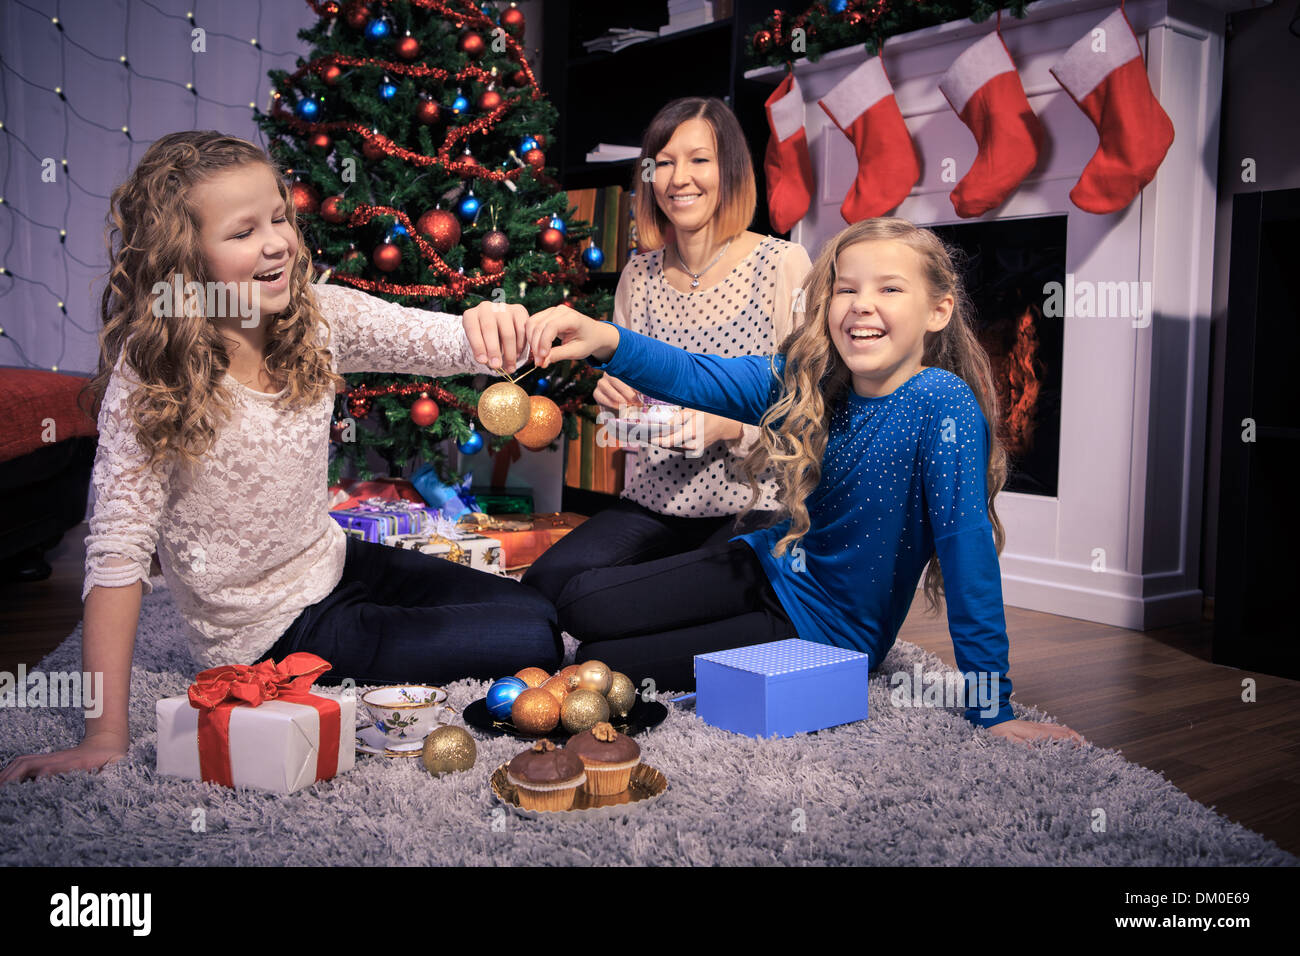 two teenage sisters and mother decorating a Christmas tree Stock Photo